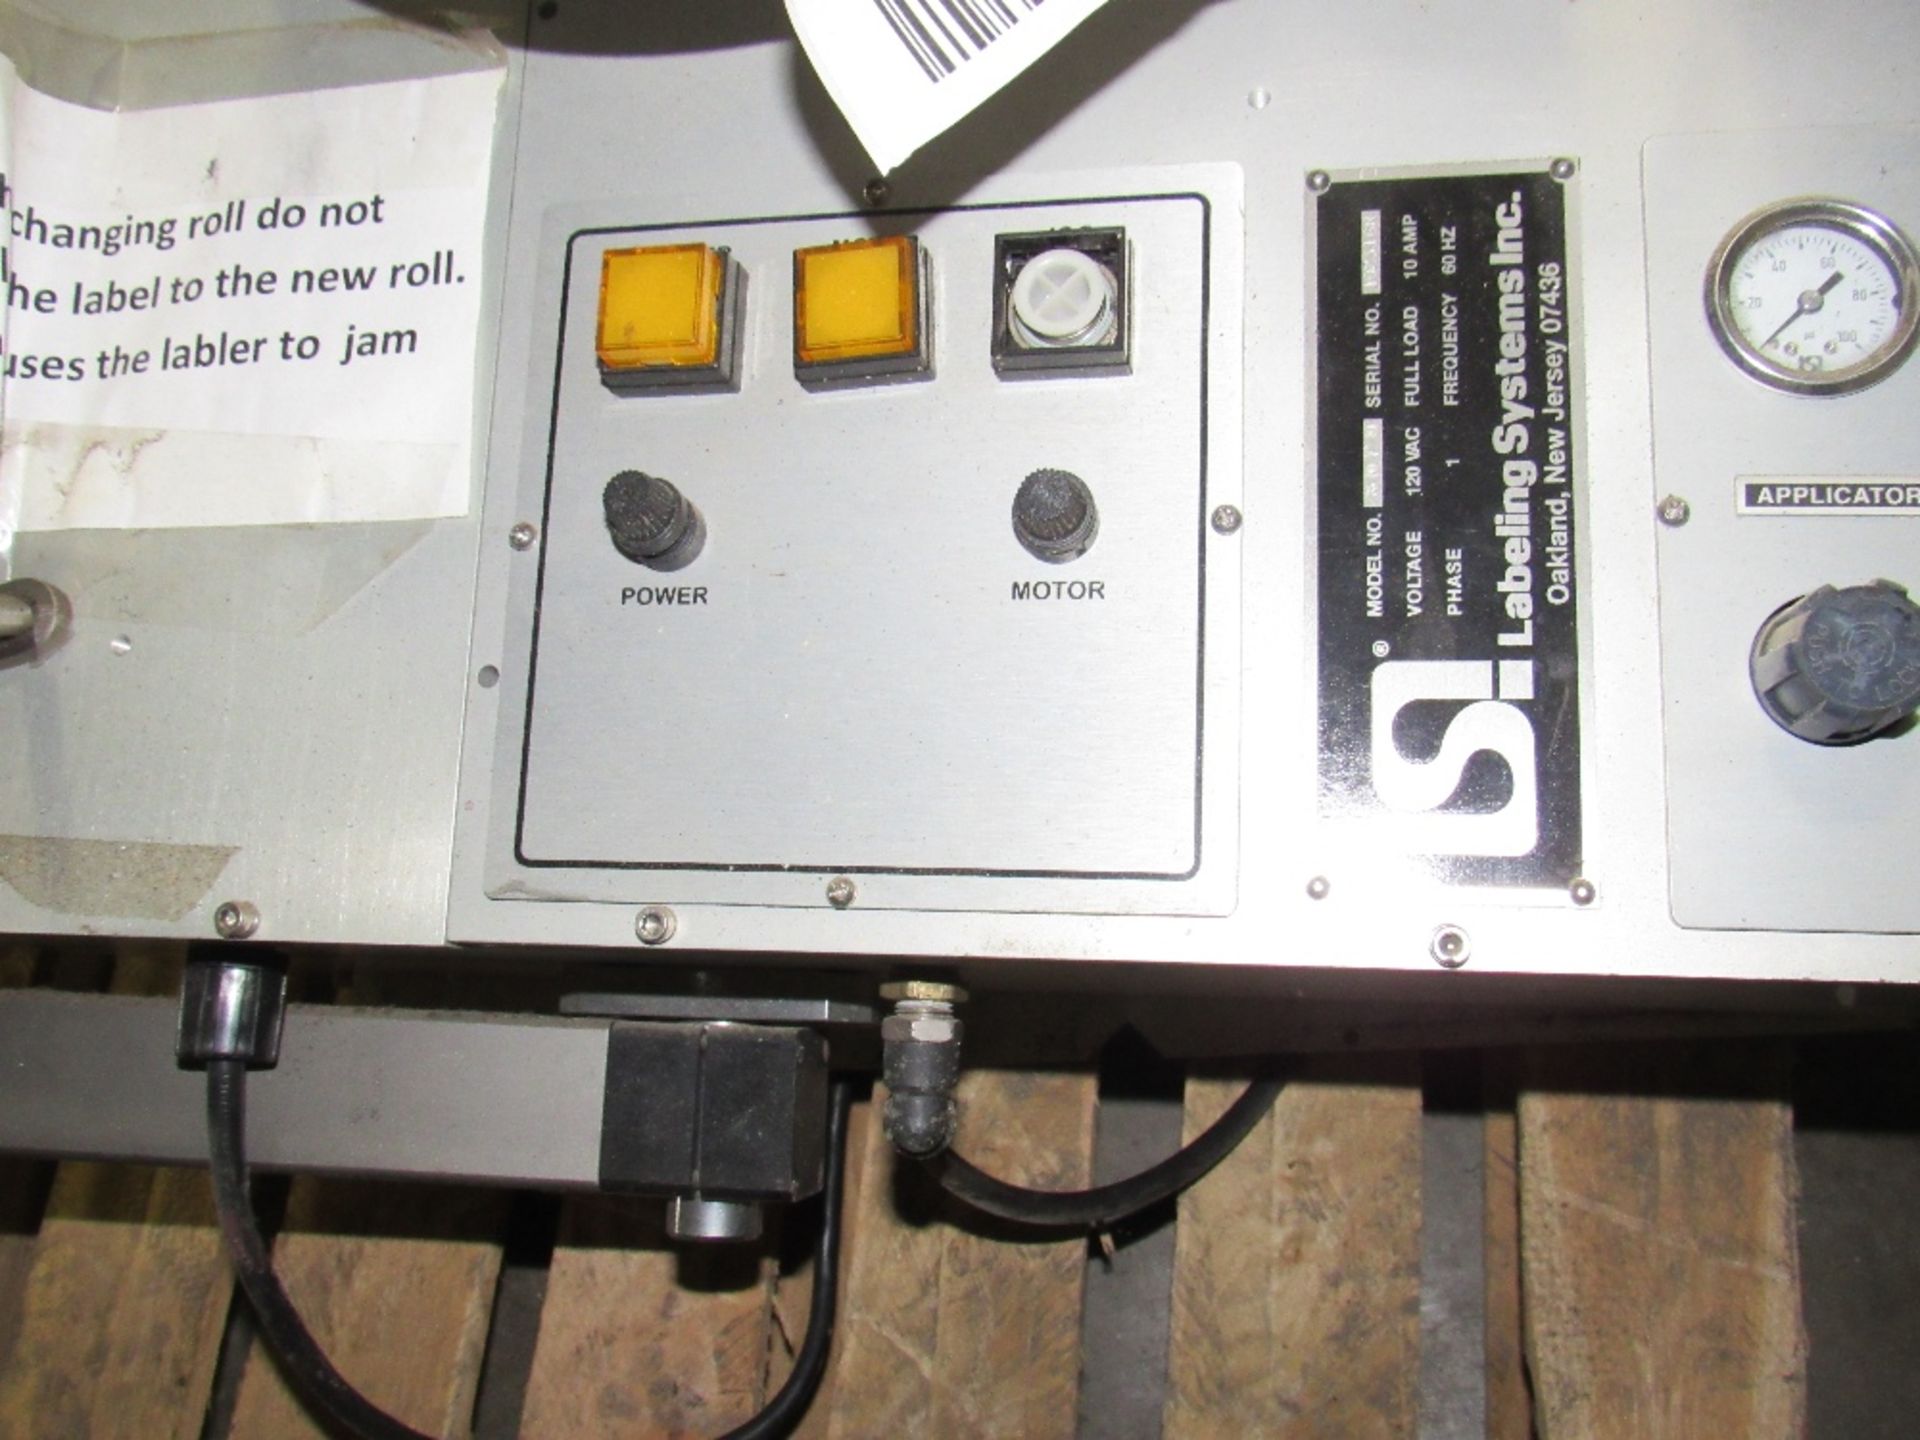 LSI Label Applicator with build in vacuum pump Model 96T0 Serial No. 1023162 designed to apply pre- - Image 10 of 10